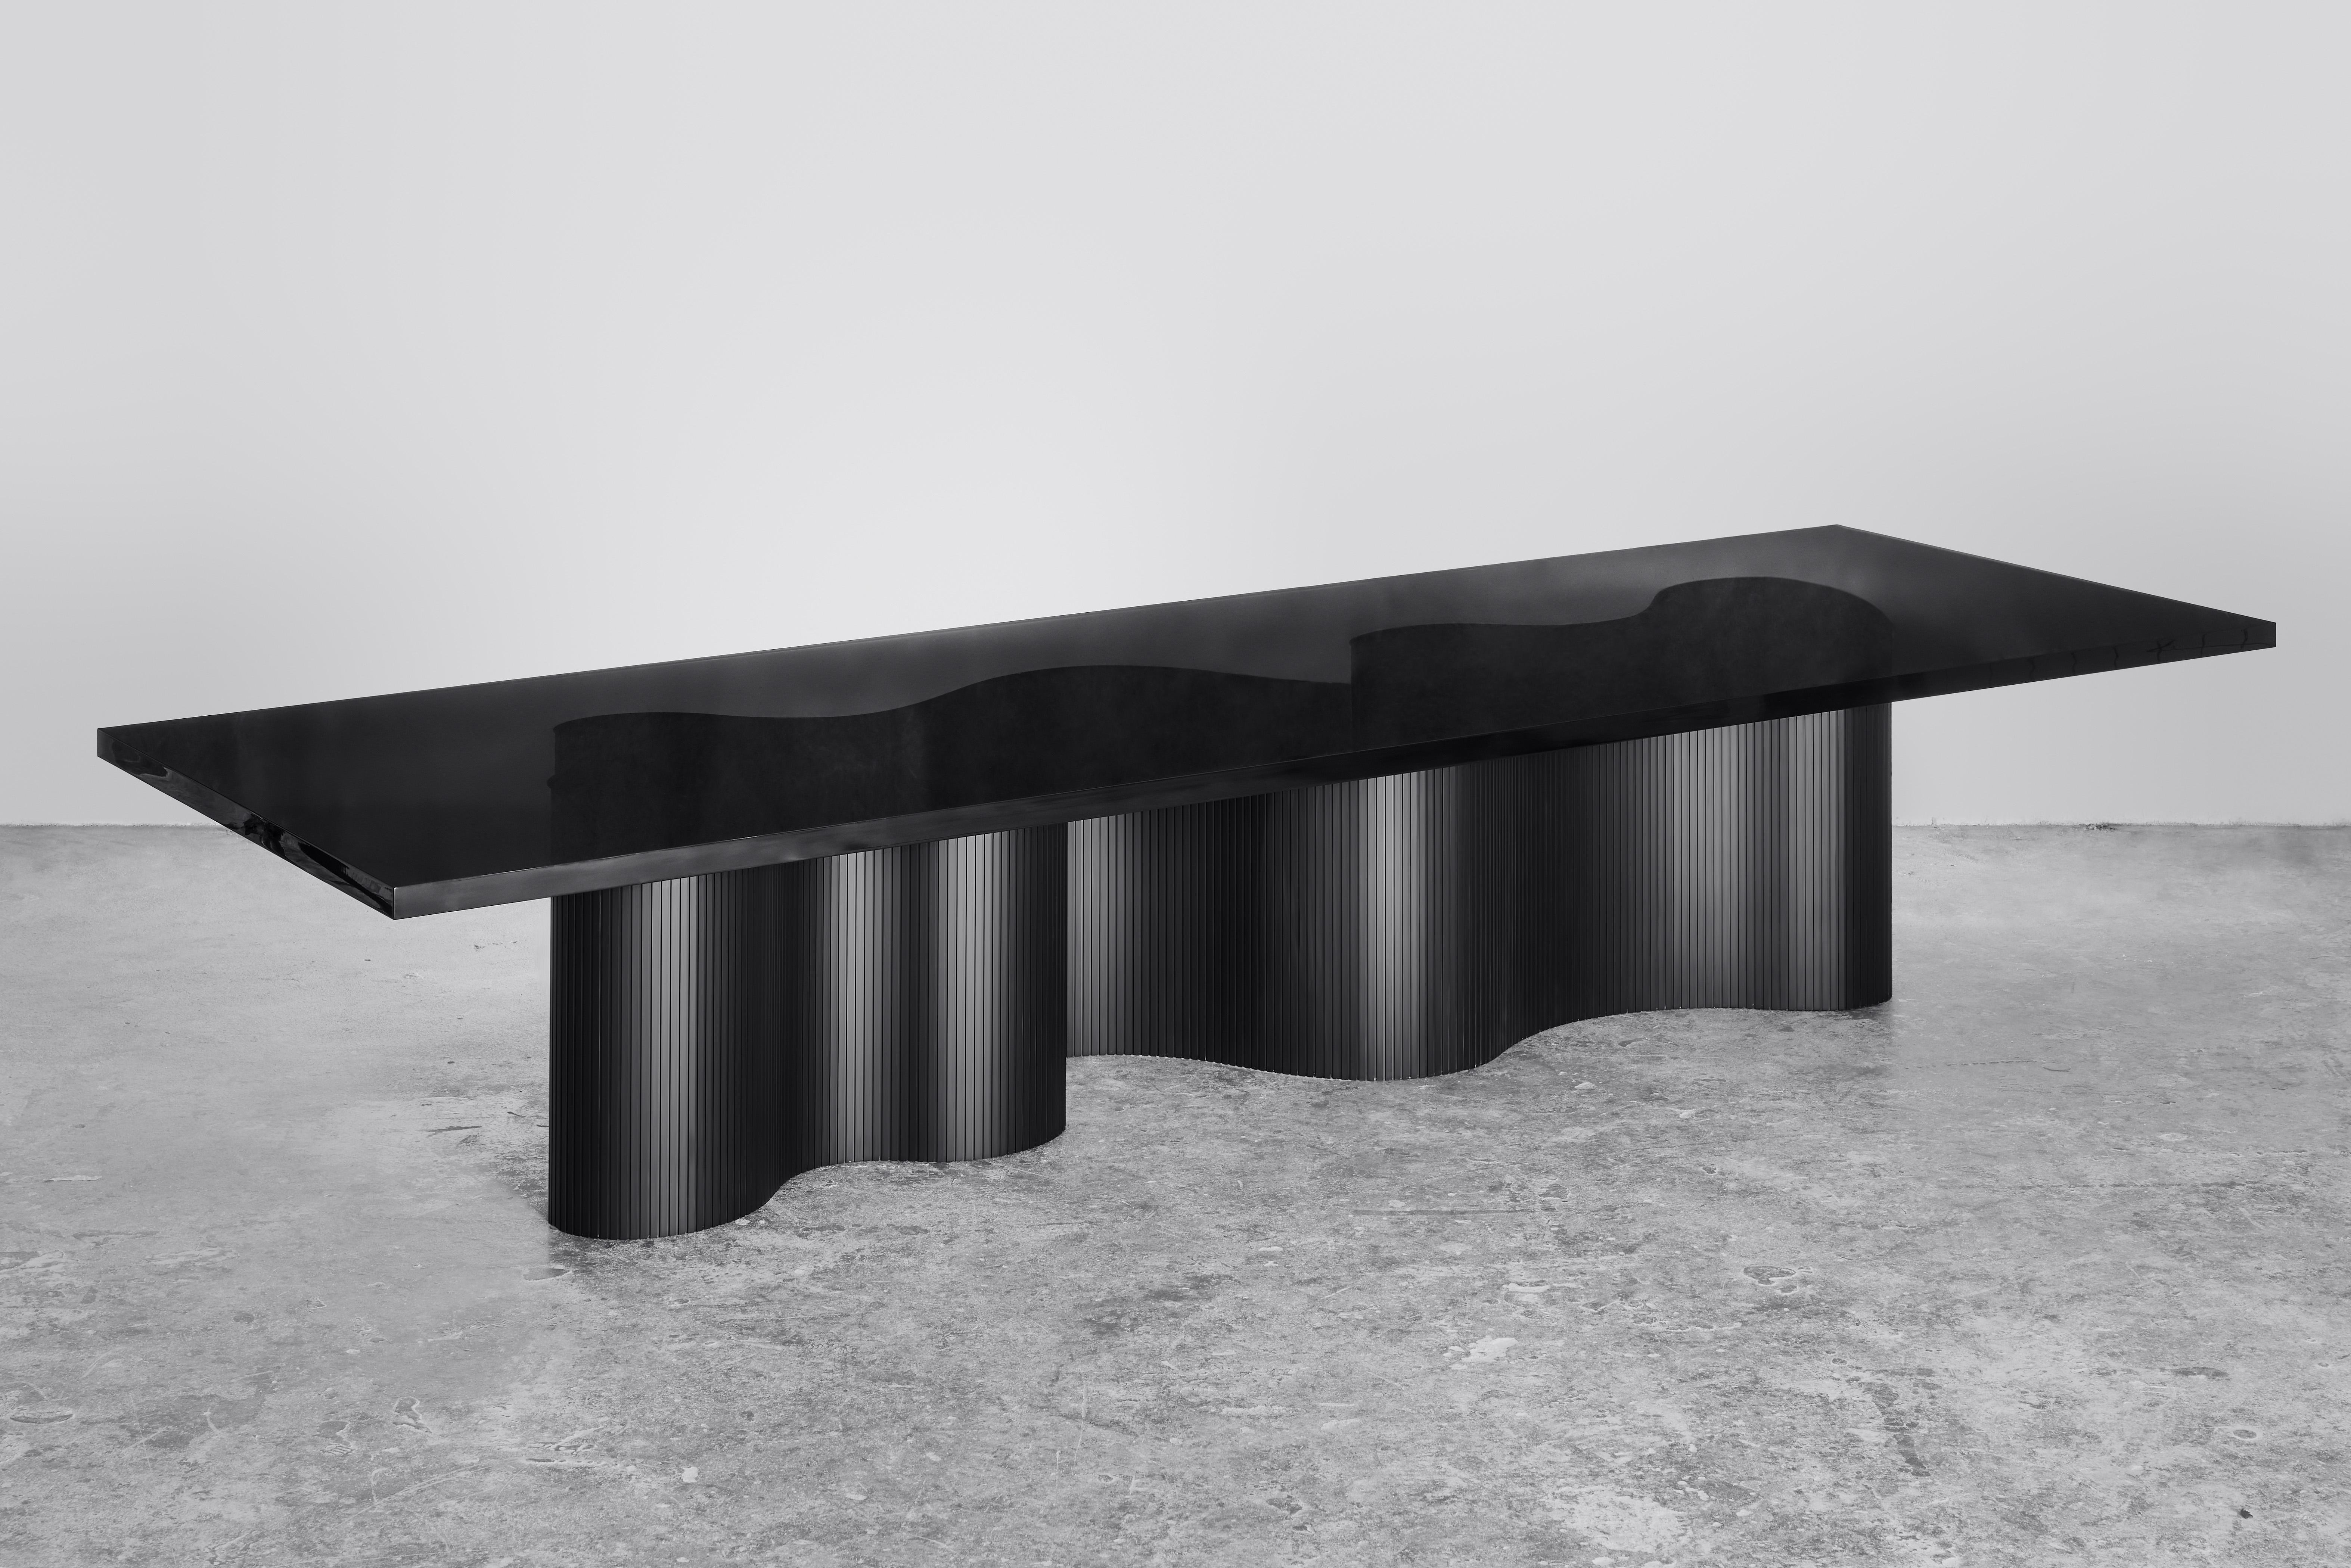 Spine is a series of tables consisting of two components, a thin aluminum sheet captured in
a cast resin surface. The series is a result of many material explorations concerned with bent forms and enhanced flexibility. 

The spine of each table